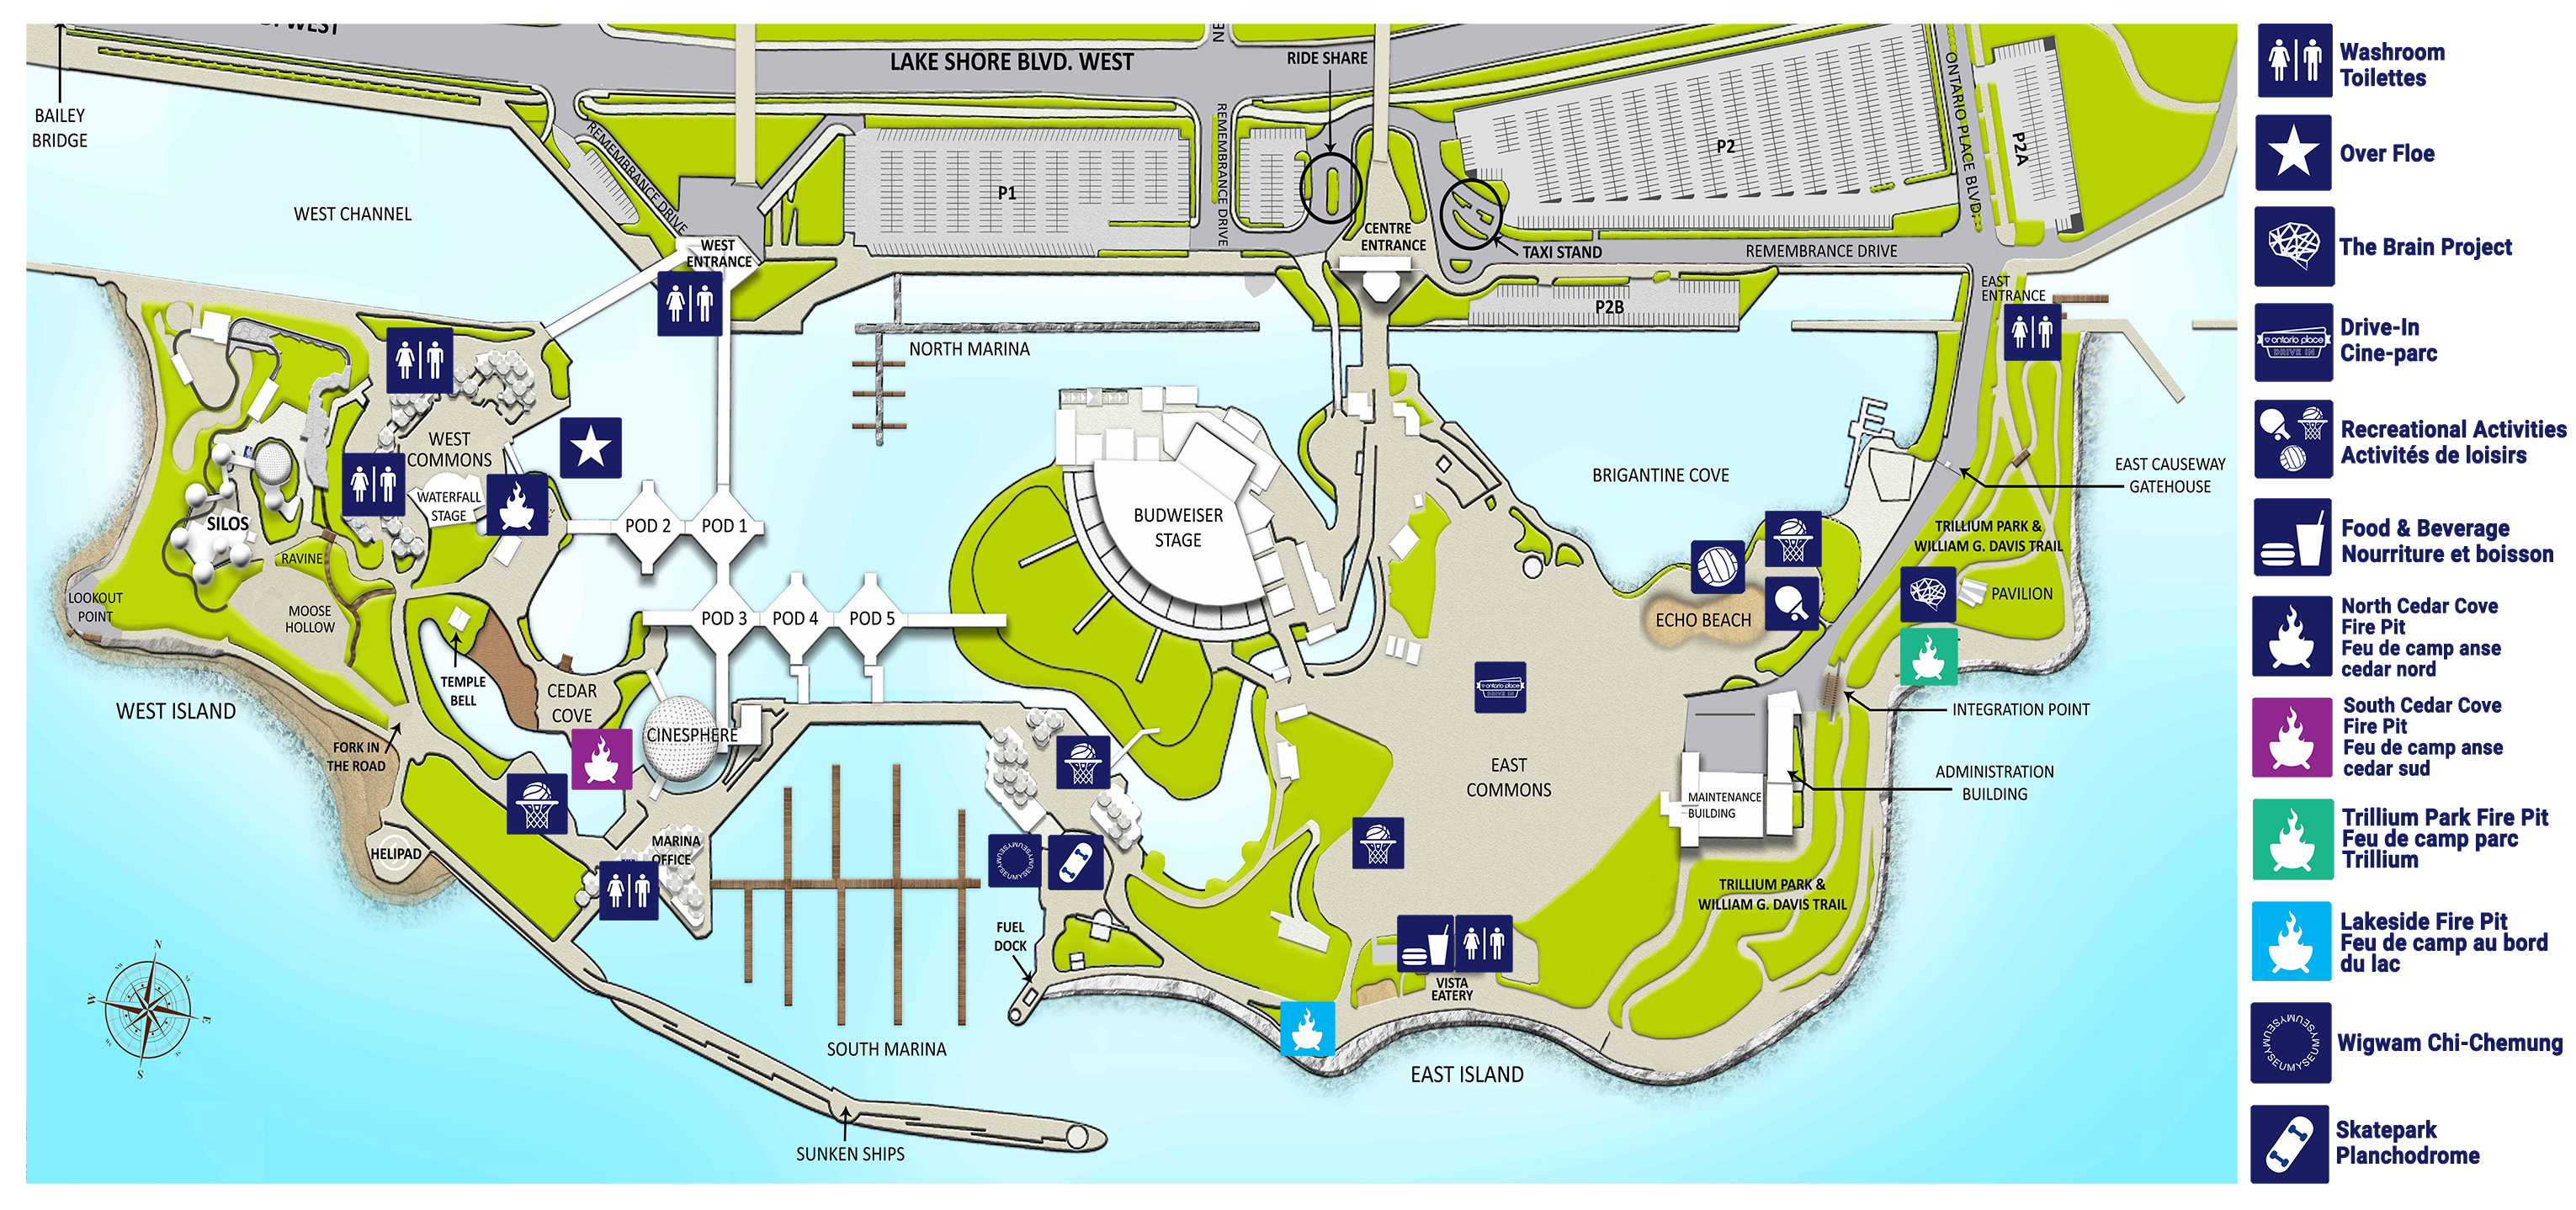 Ontario Place Site Map